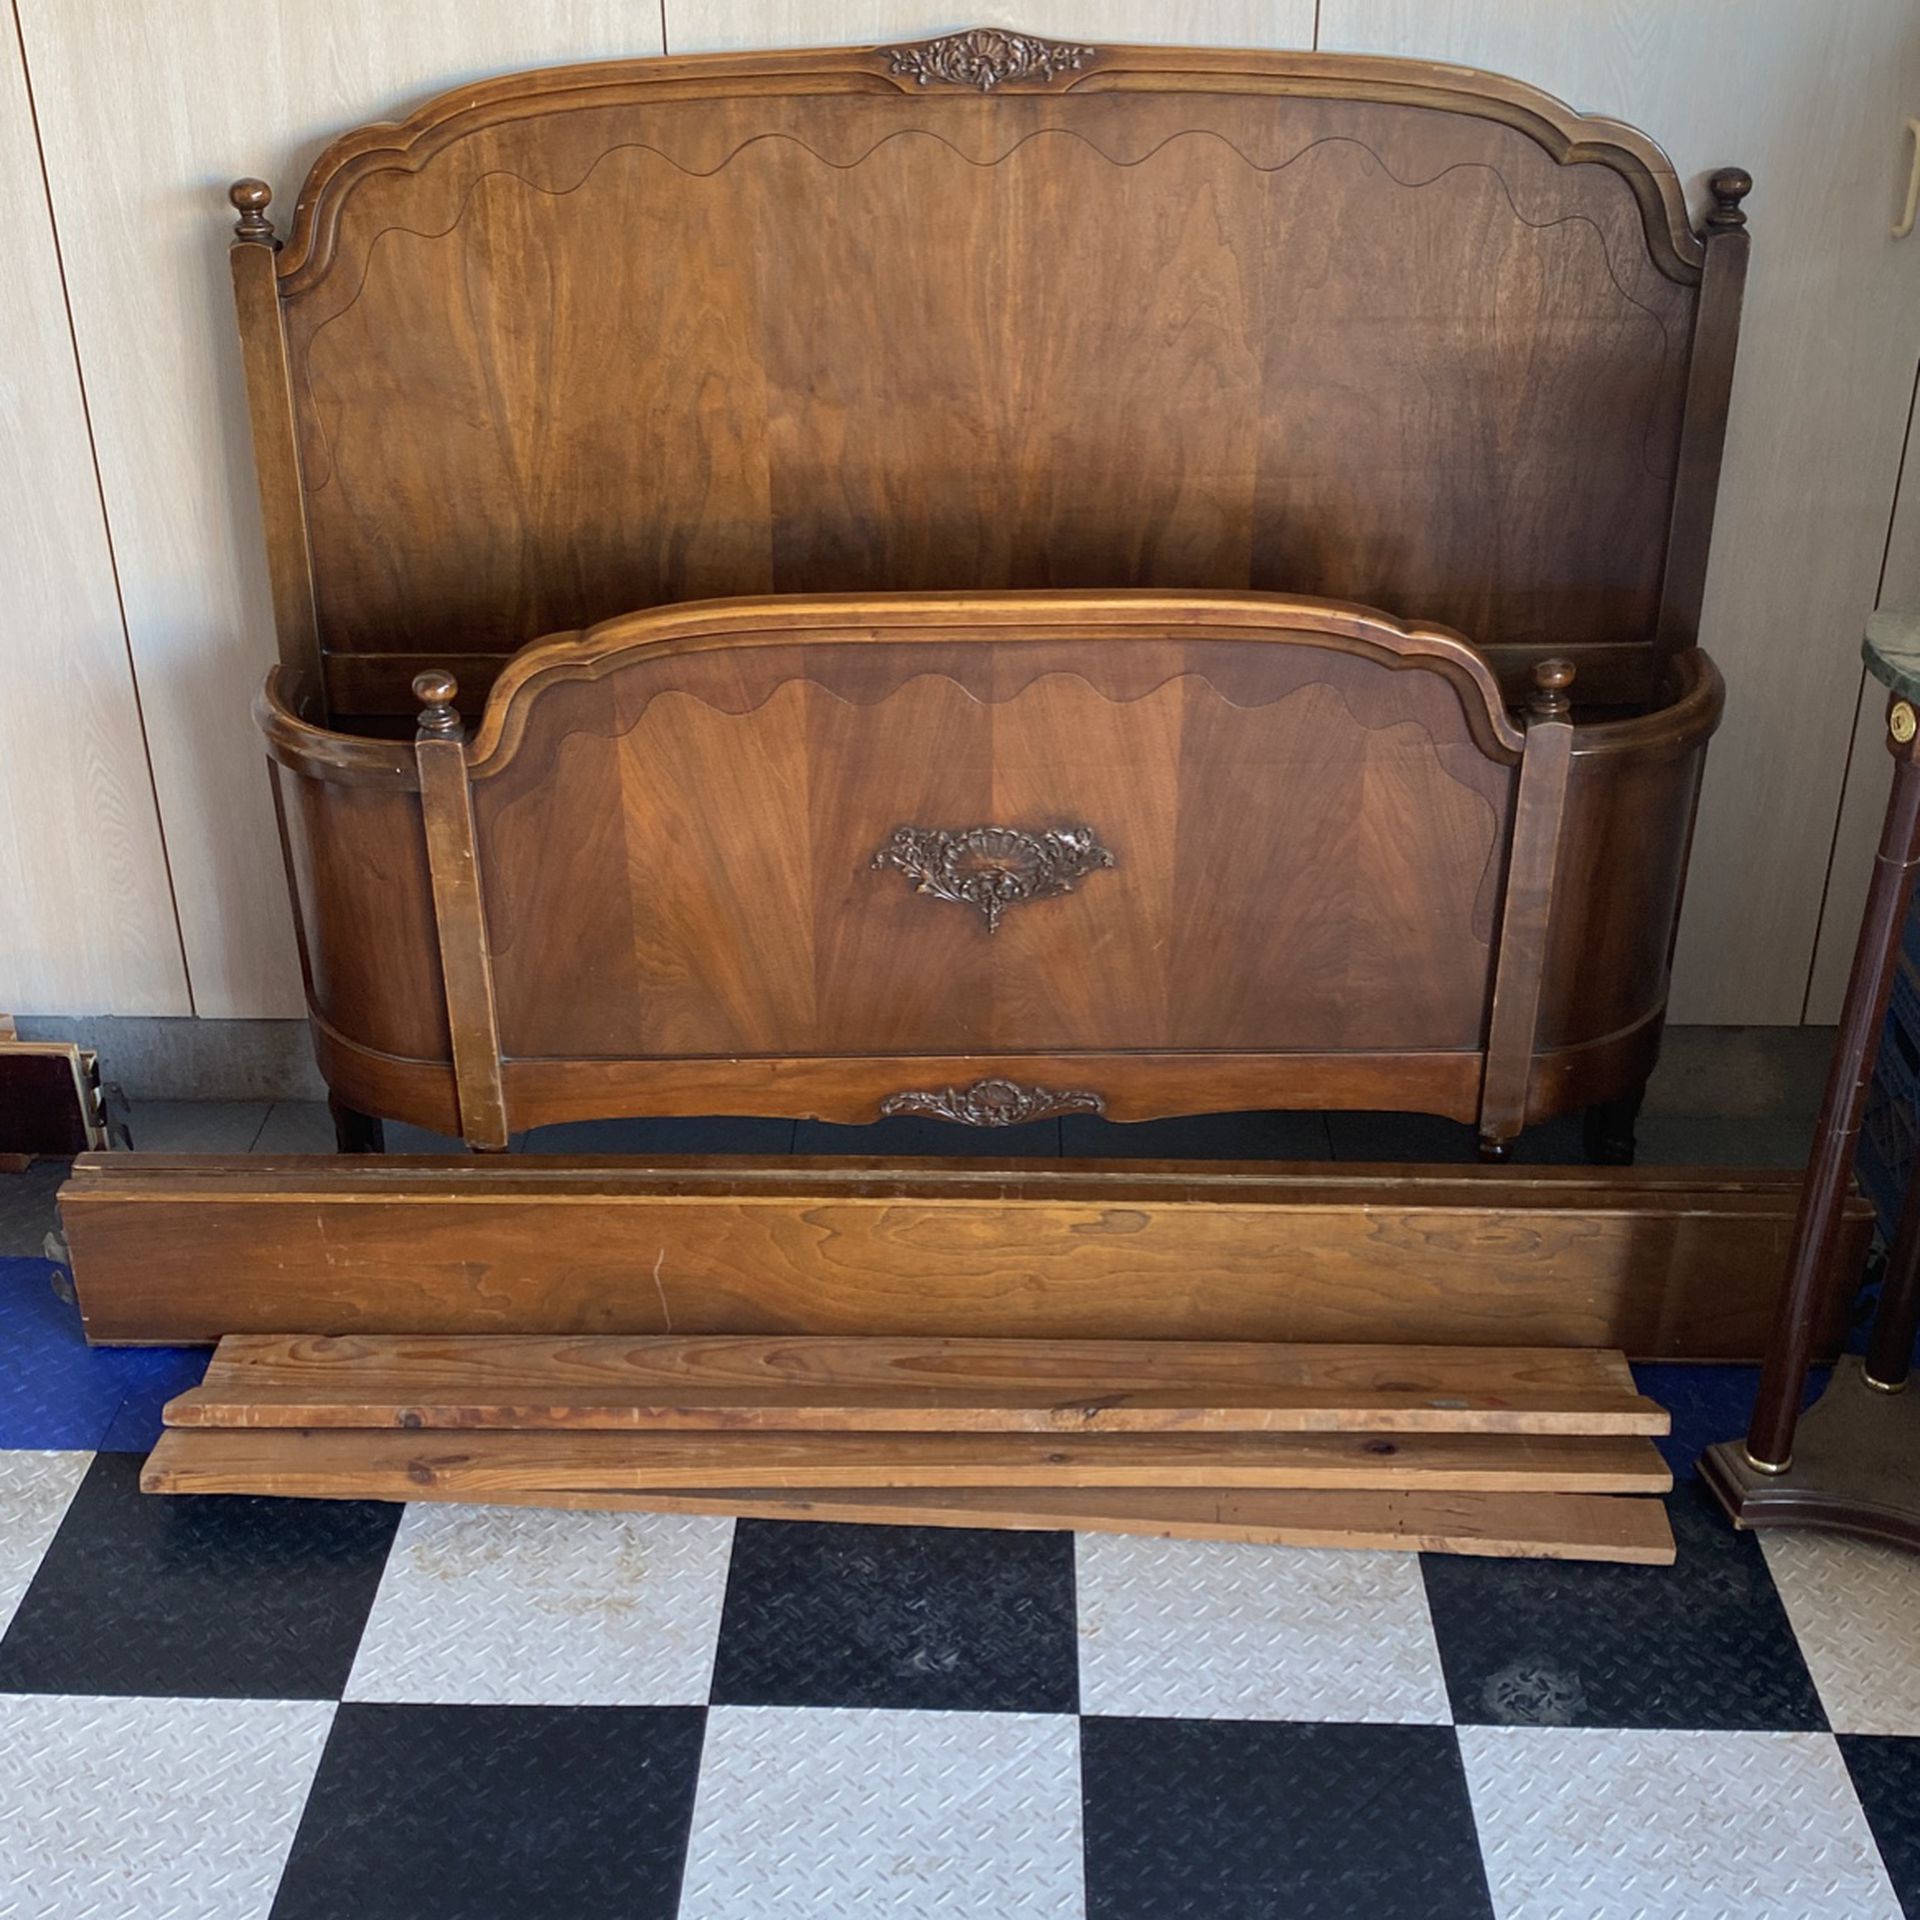 Antique full Size Bed